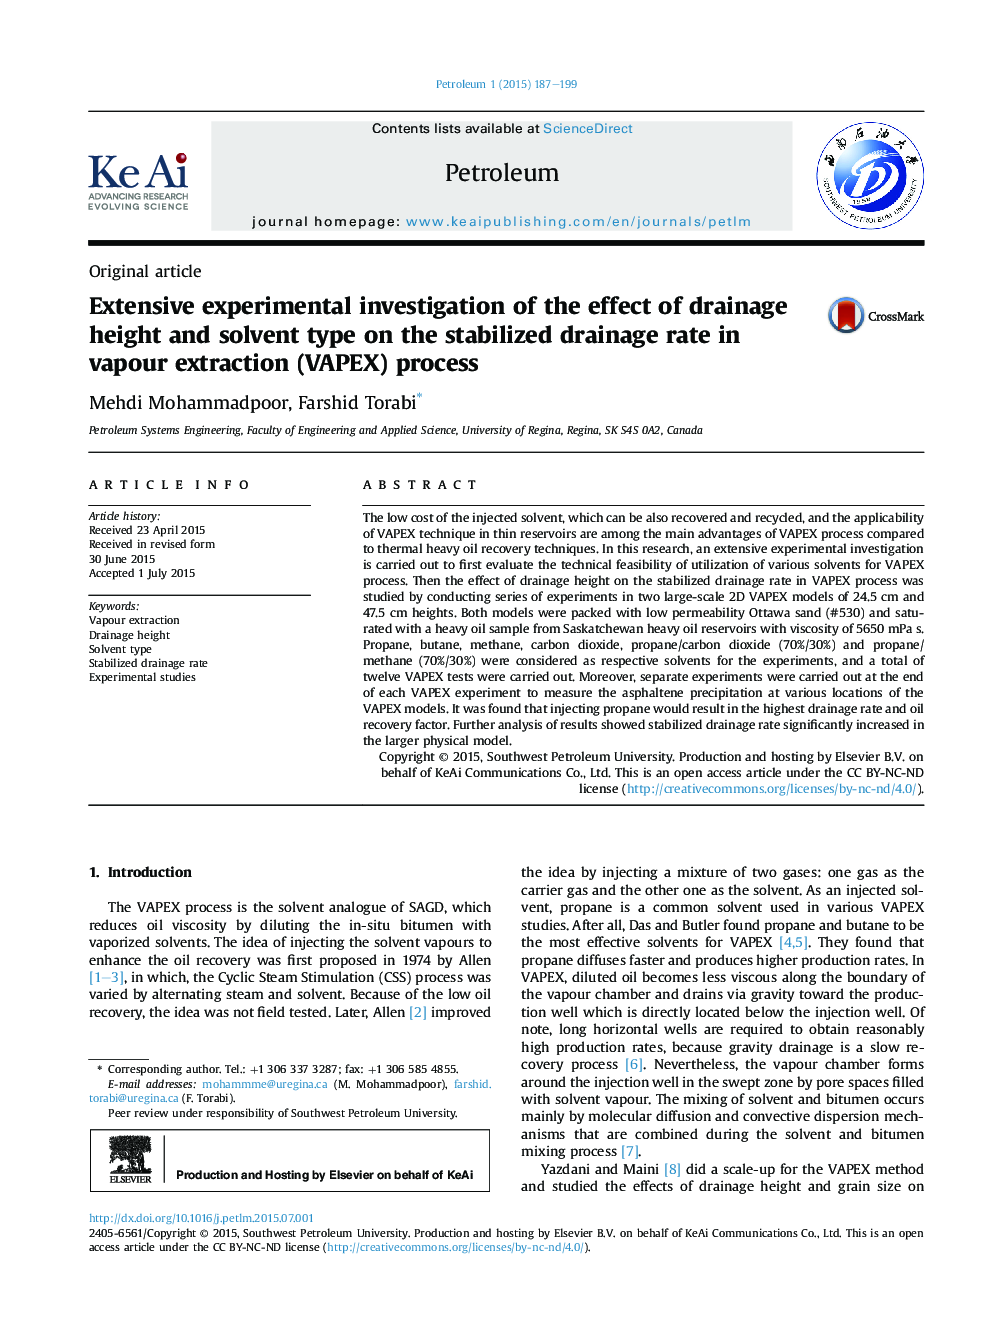 Extensive experimental investigation of the effect of drainage height and solvent type on the stabilized drainage rate in vapour extraction (VAPEX) process 